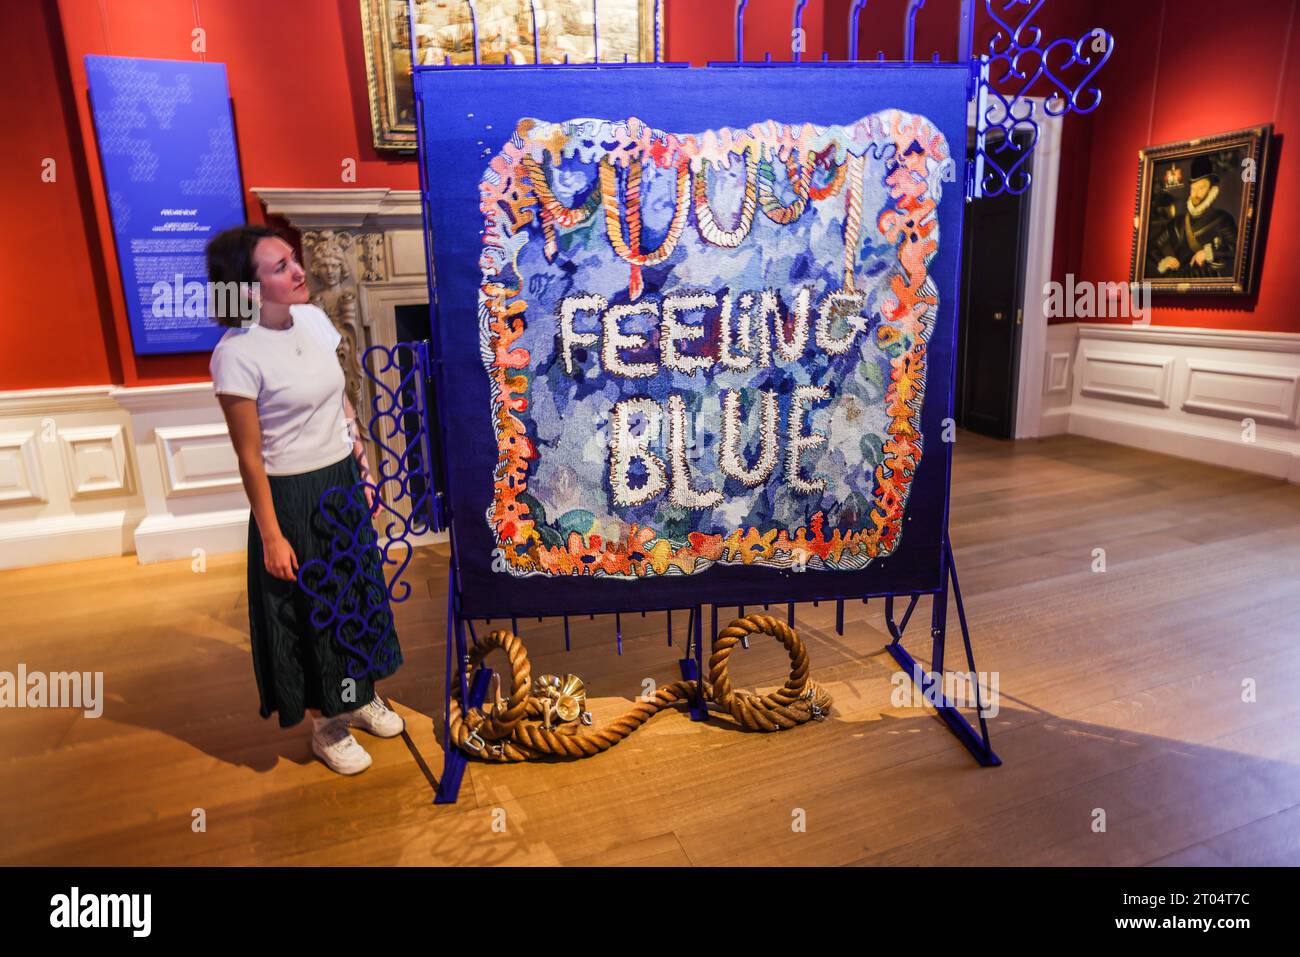 London, UK. 04th Oct, 2023. Royal Museums Greenwich unveiled a major new commission opening at the Queen's House The piece, by artist Alberta Whittle, is called ‘Feeling Blue' and was woven in Edinburgh by Dovecot. Is displayed on powder-coated steel gates, designed by Whittle and made at Glasgow Sculpture Studios. Credit: Paul Quezada-Neiman/Alamy Live News Stock Photo